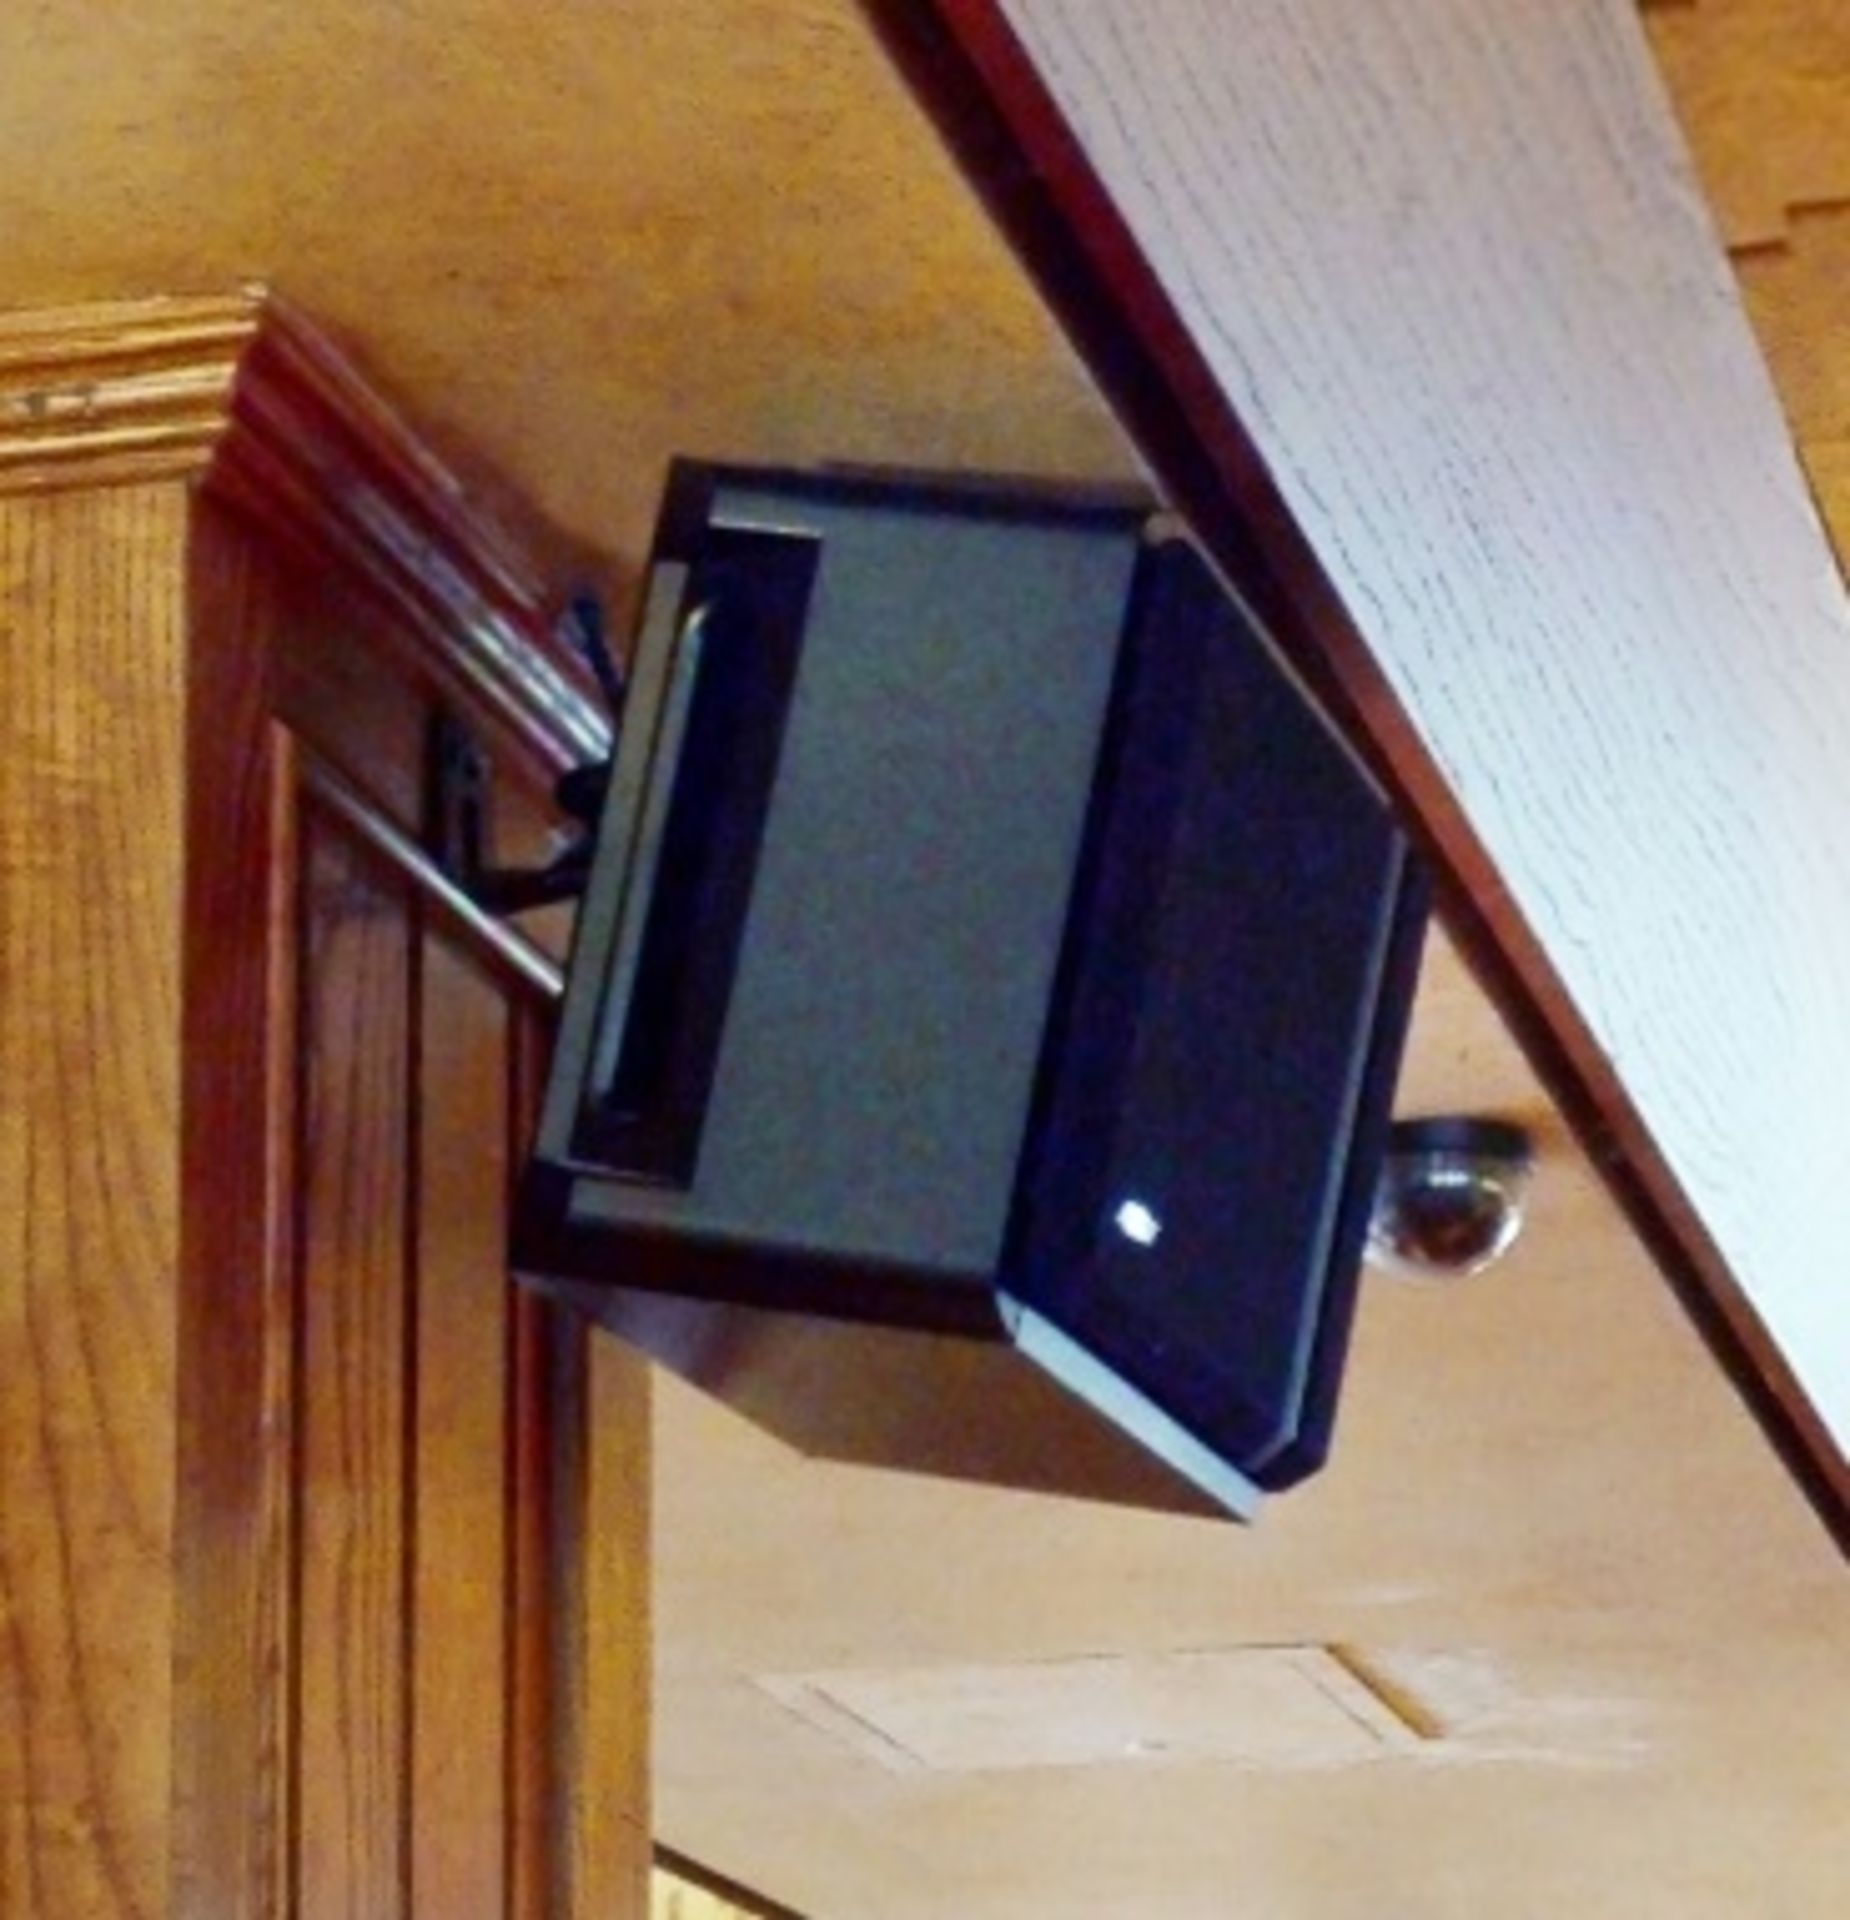 1 x Restaurant Audio System Including 1 x QSC RMX850 Amplifier, 12 x Bose Speaker System & More! - Image 16 of 17